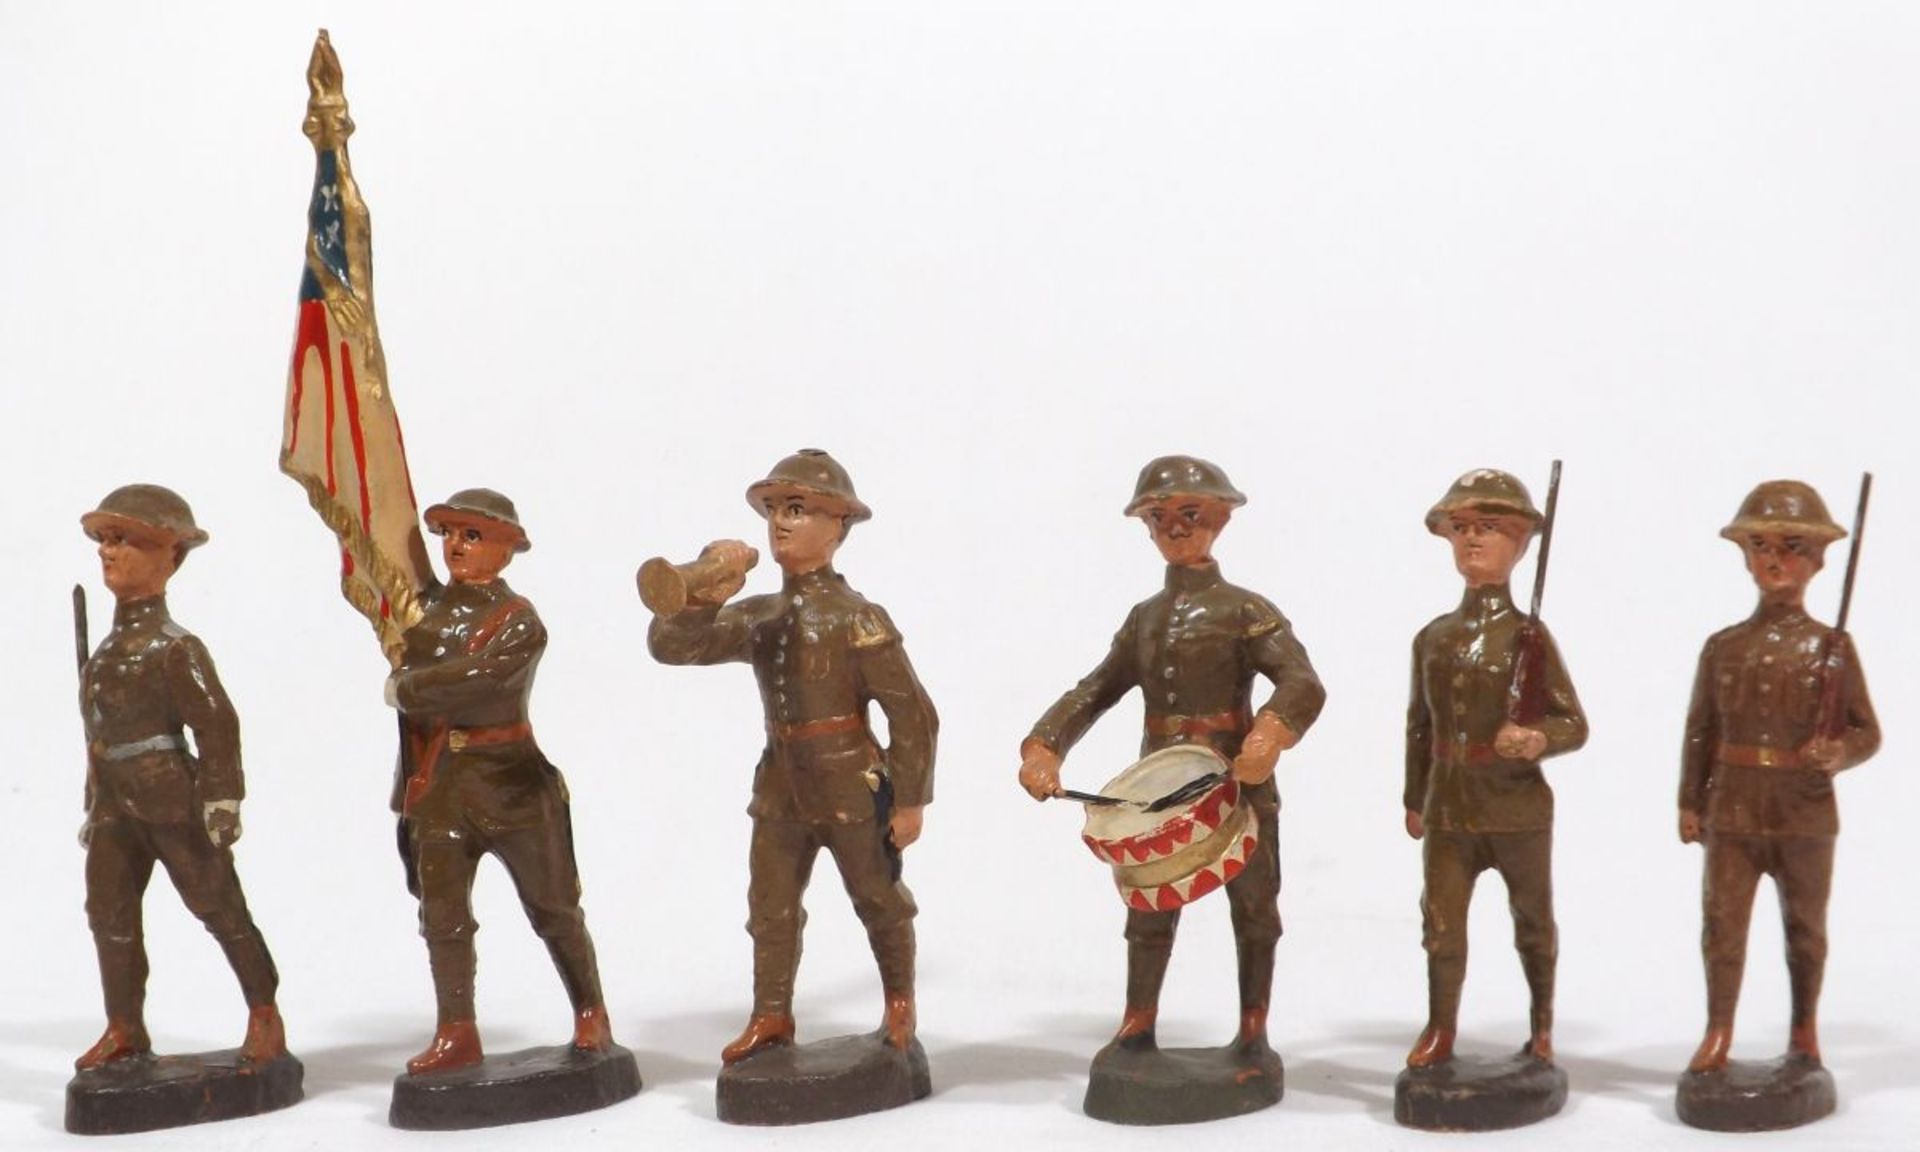 USA military, Elastolin or Lineol or others, composition figures, big size, made in Germany probably